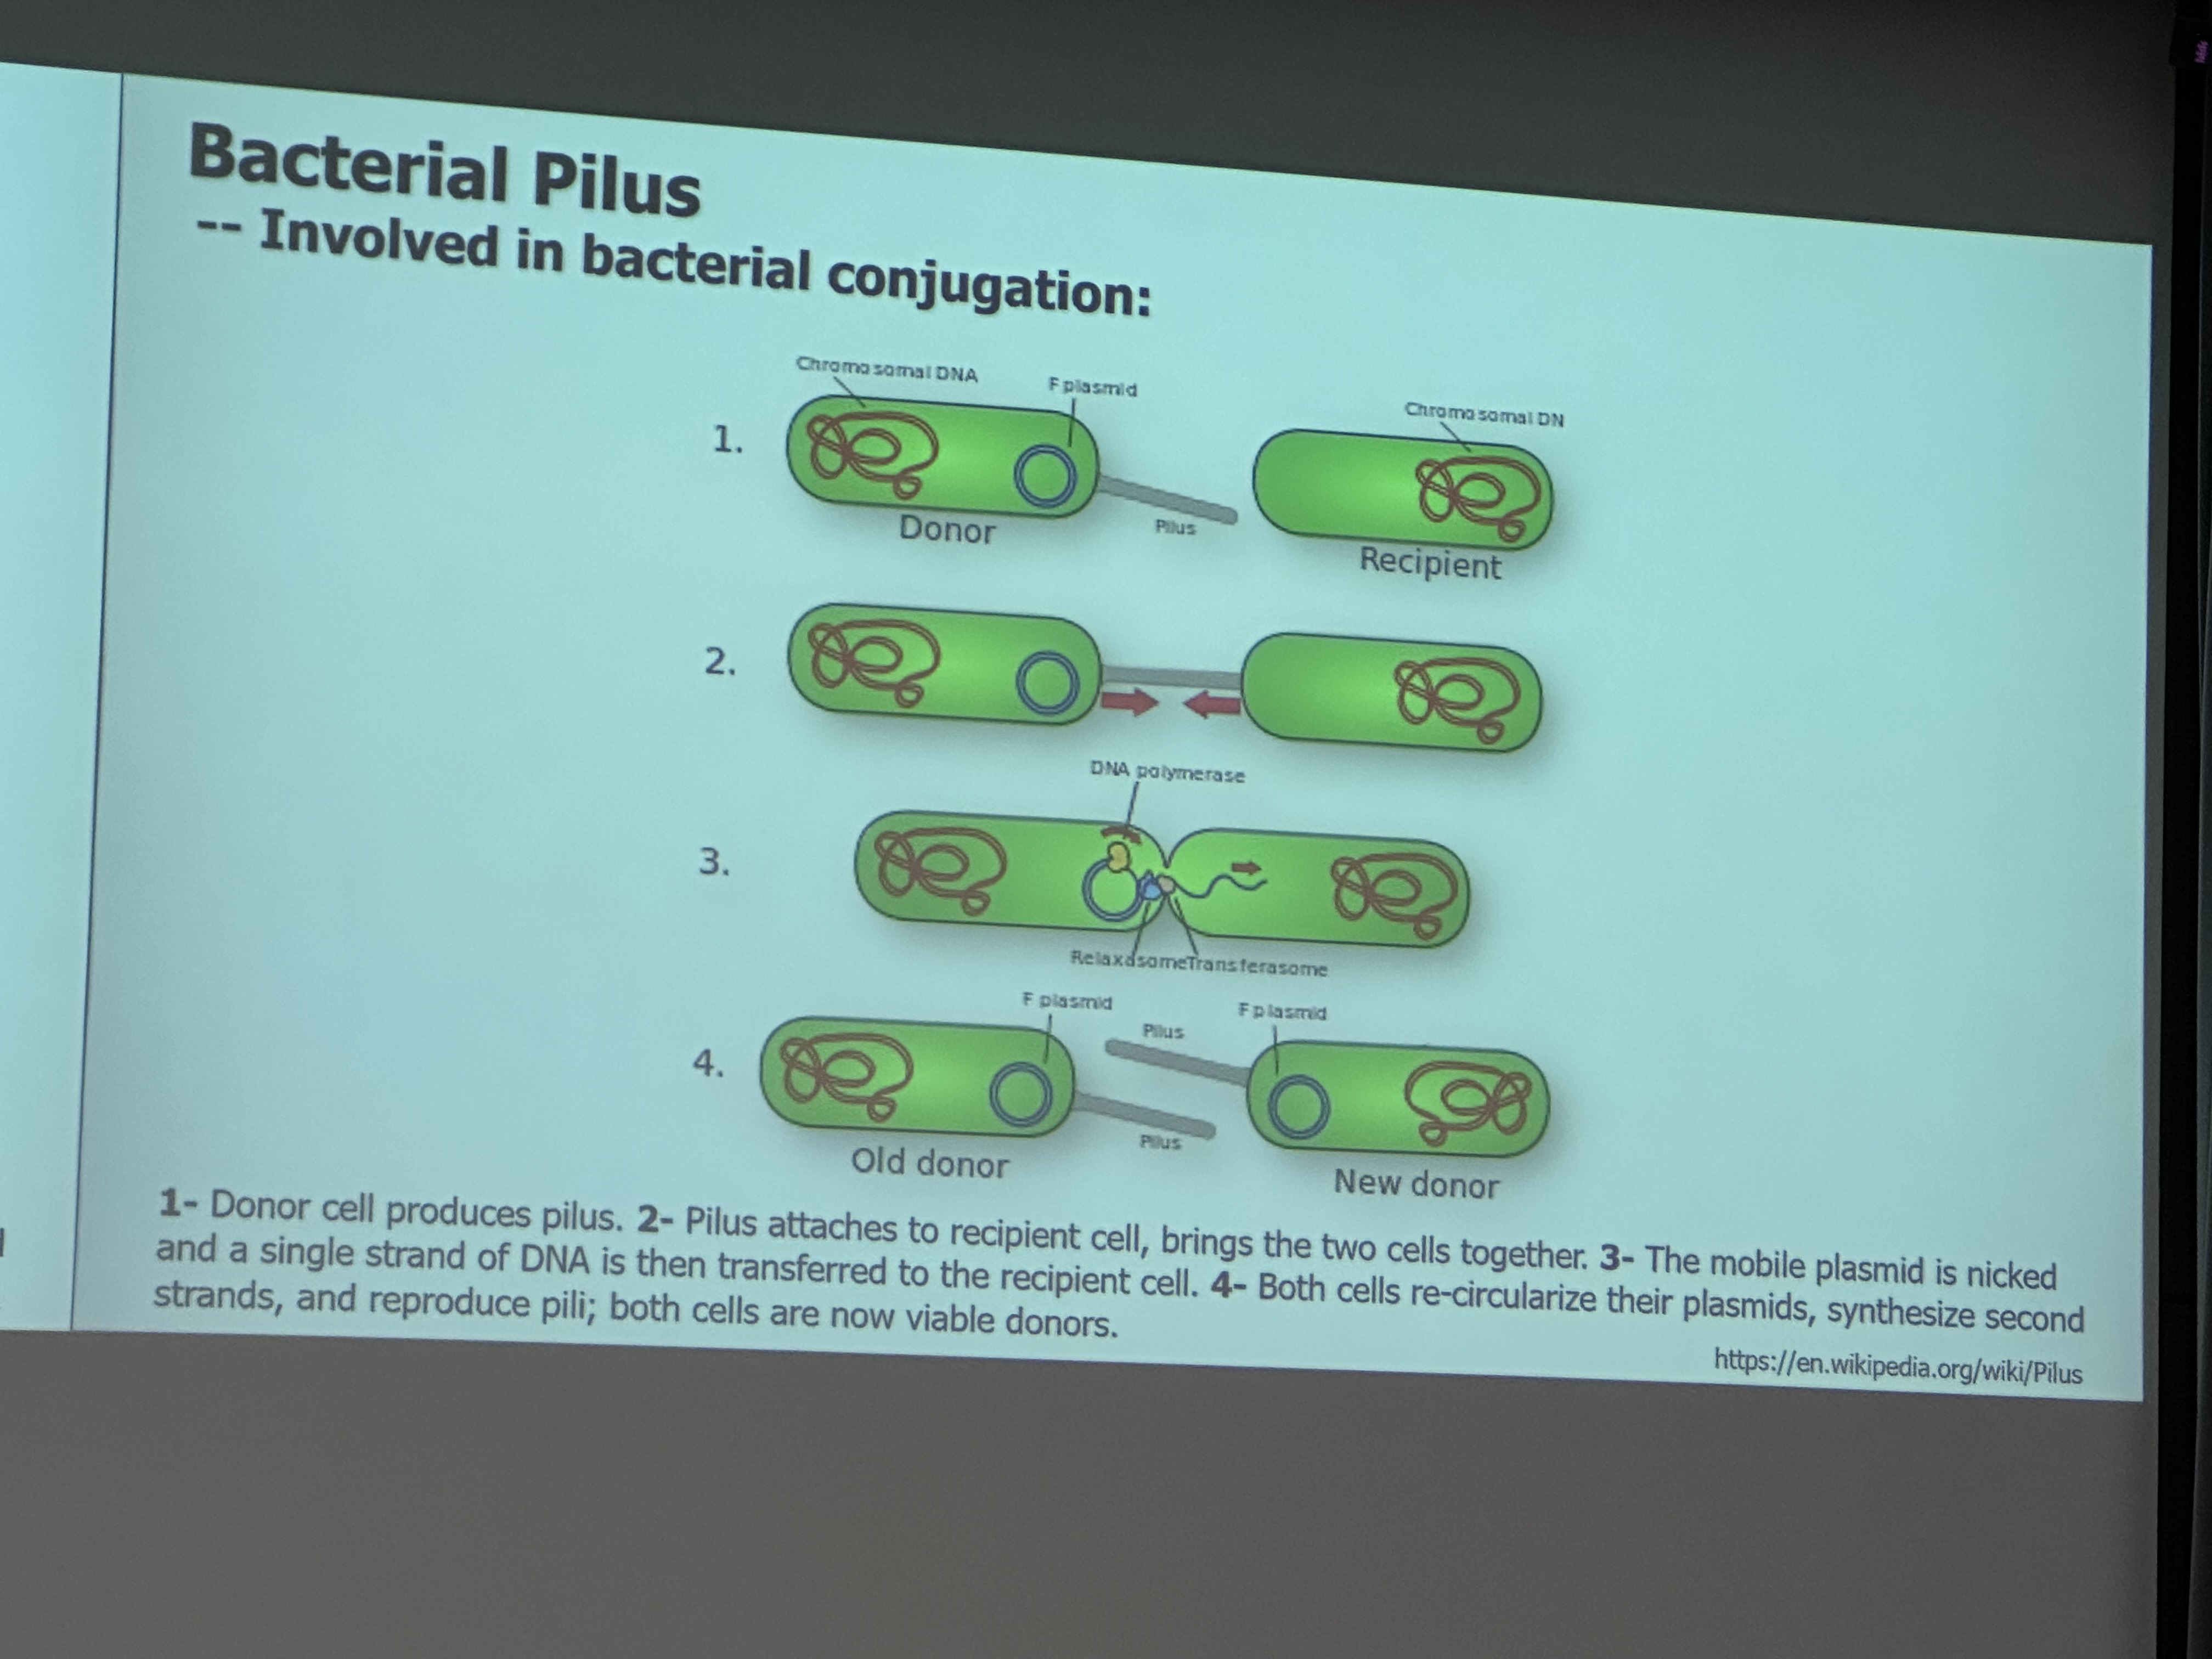 <p>A pilus (surface of bacteria) leaves its body and enters the other’s membrane containing some genetic material <mark data-color="red">(horizontal gene transfer)</mark></p>